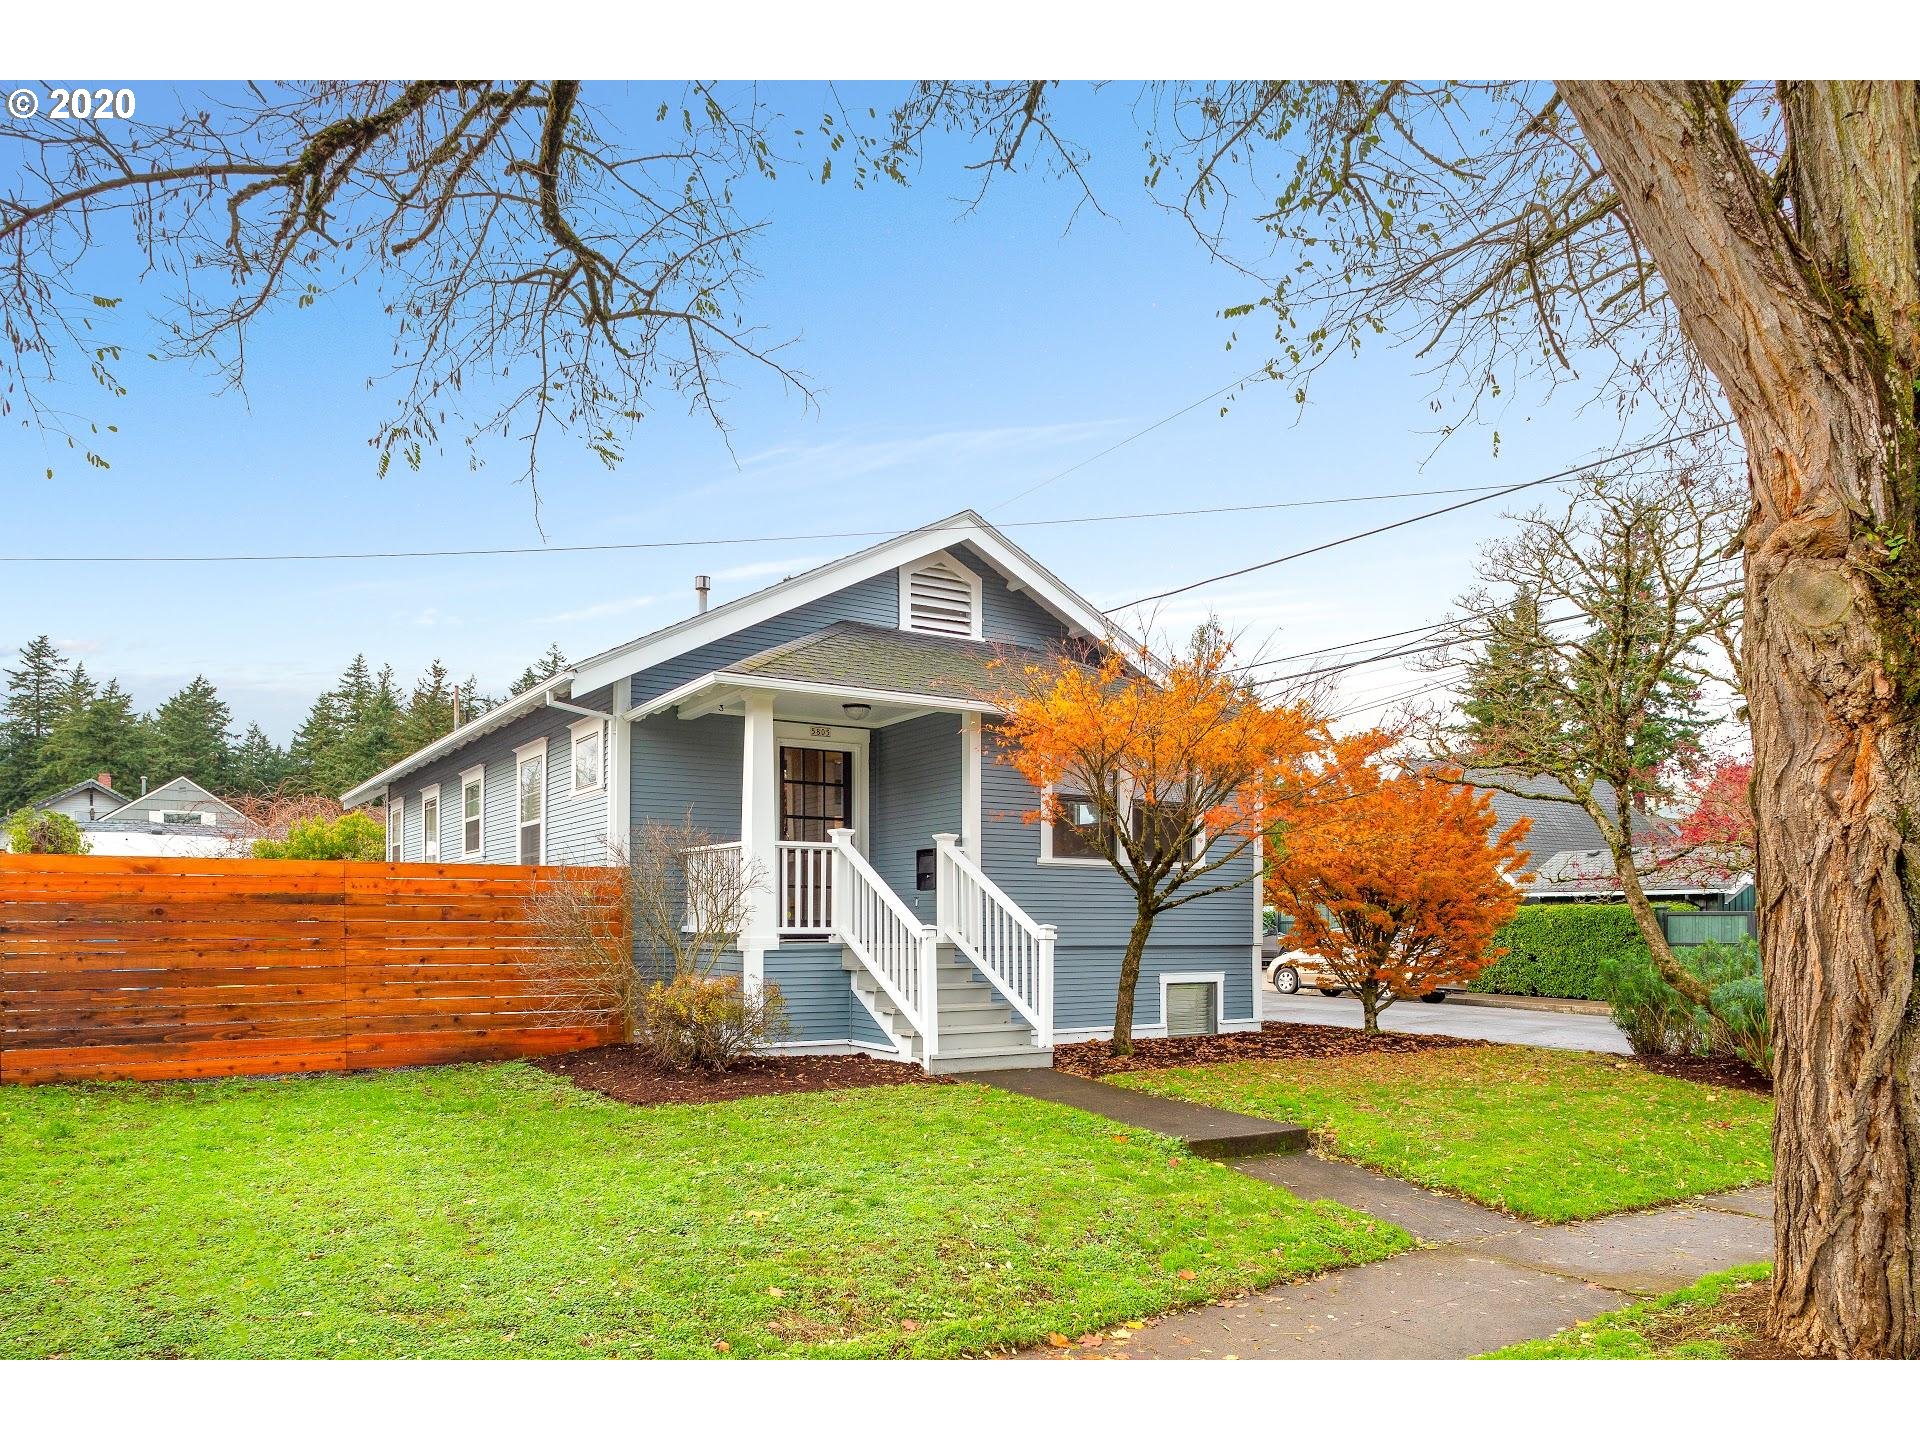 5805 SE 77TH AVE (1 of 29)